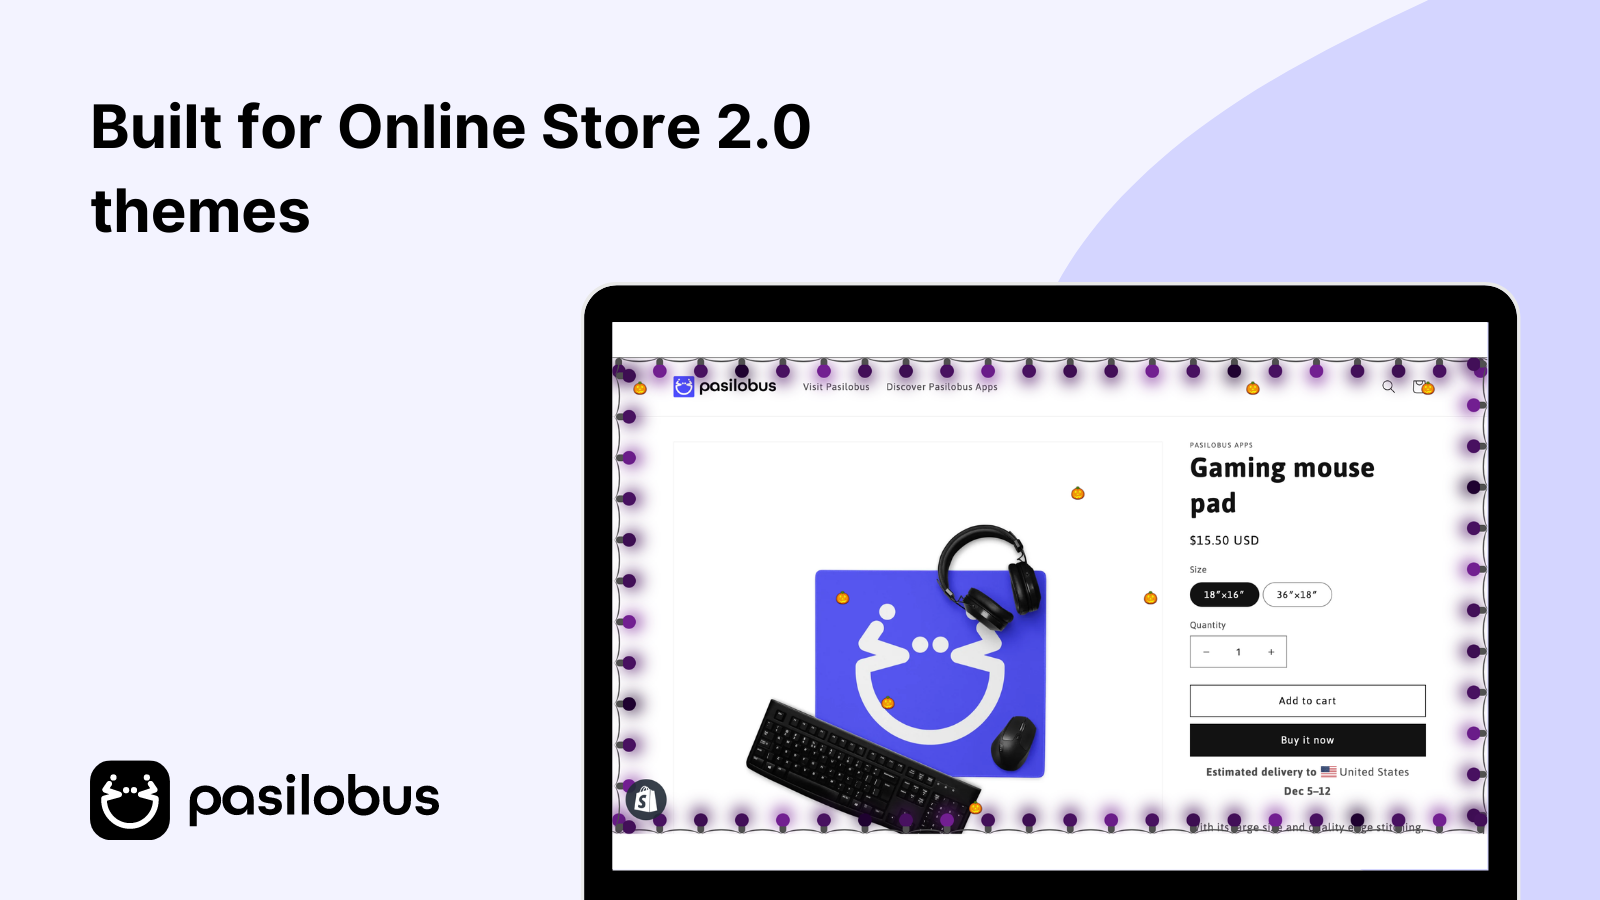 Built for Online Store 2.0 themes | Magic Decorations